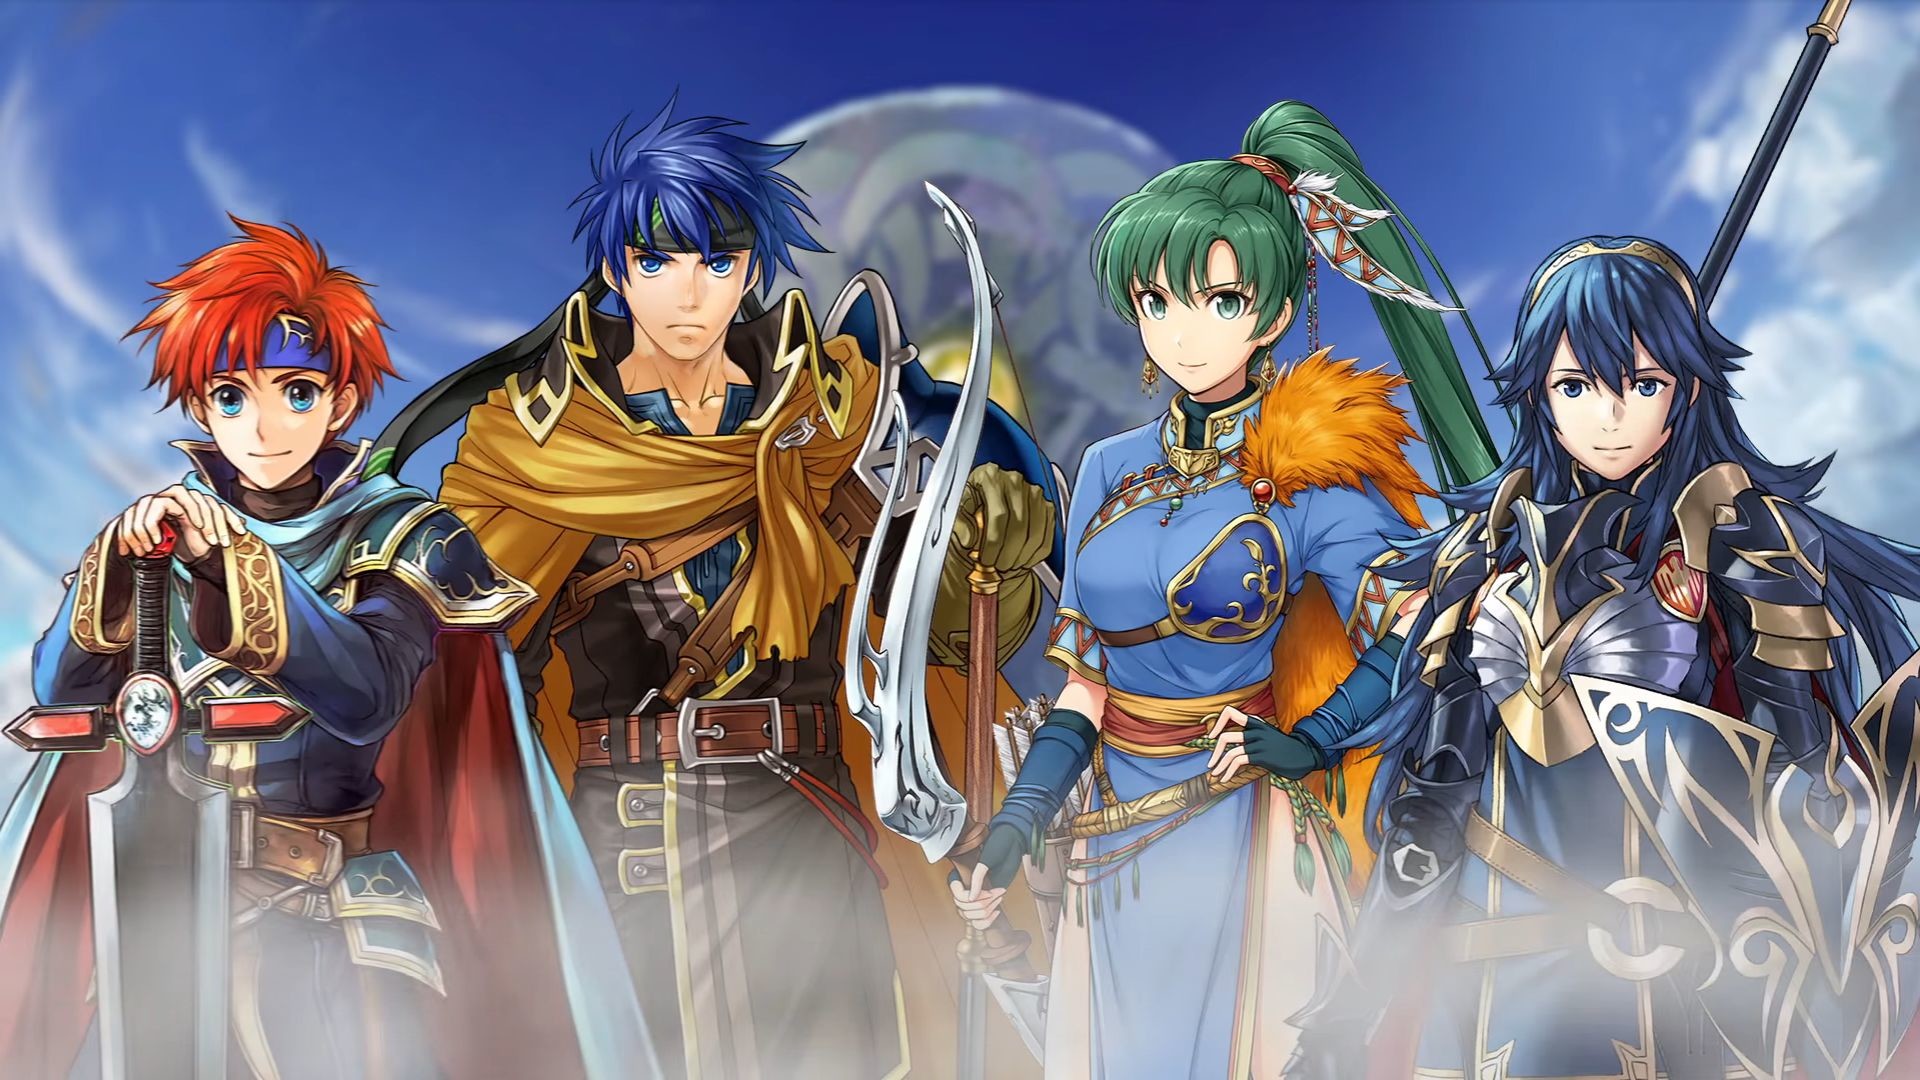 1920x1080 Fire Emblem Heroes Gets Live Action Trailer Showing Lucina, Lyn, Roy and  Ike - Gaming Fan